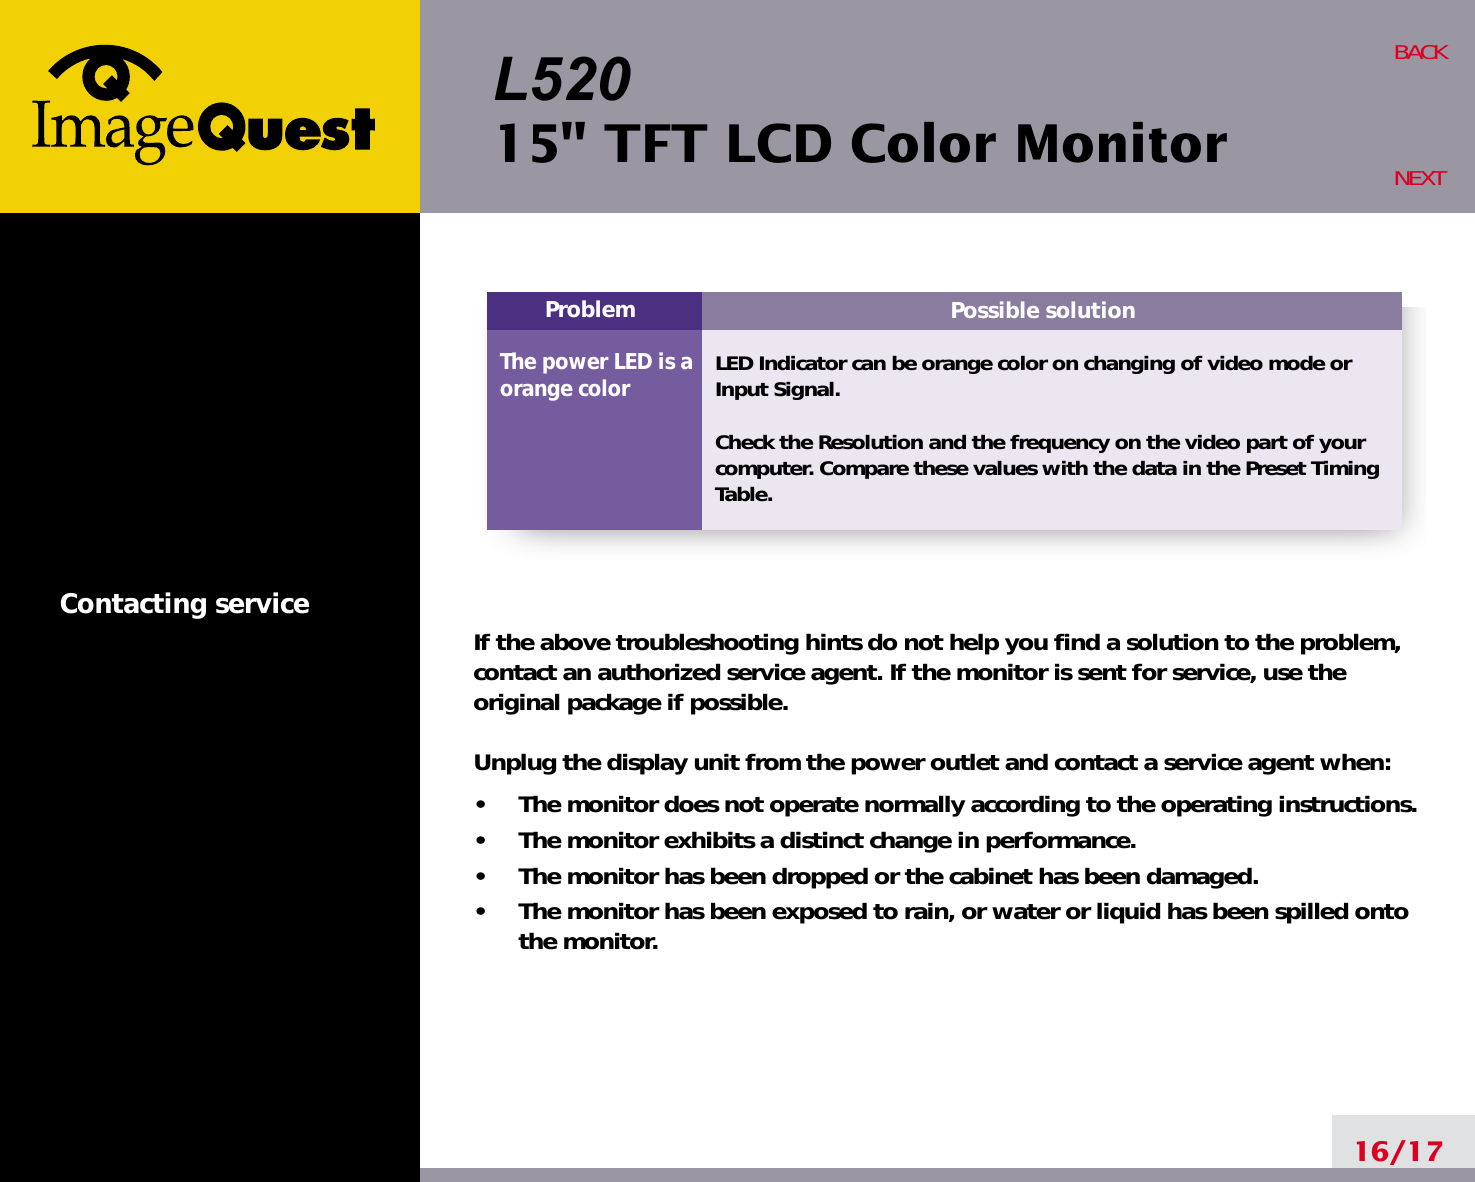 L52015&quot; TFT LCD Color MonitorContacting service16/17BACKNEXTPossible solutionLED Indicator can be orange color on changing of video mode orInput Signal.Check the Resolution and the frequency on the video part of yourcomputer. Compare these values with the data in the Preset TimingTable.ProblemThe power LED is aorange colorIf the above troubleshooting hints do not help you find a solution to the problem,contact an authorized service agent. If the monitor is sent for service, use theoriginal package if possible.Unplug the display unit from the power outlet and contact a service agent when:•     The monitor does not operate normally according to the operating instructions.•     The monitor exhibits a distinct change in performance.•     The monitor has been dropped or the cabinet has been damaged.•     The monitor has been exposed to rain, or water or liquid has been spilled ontothe monitor.